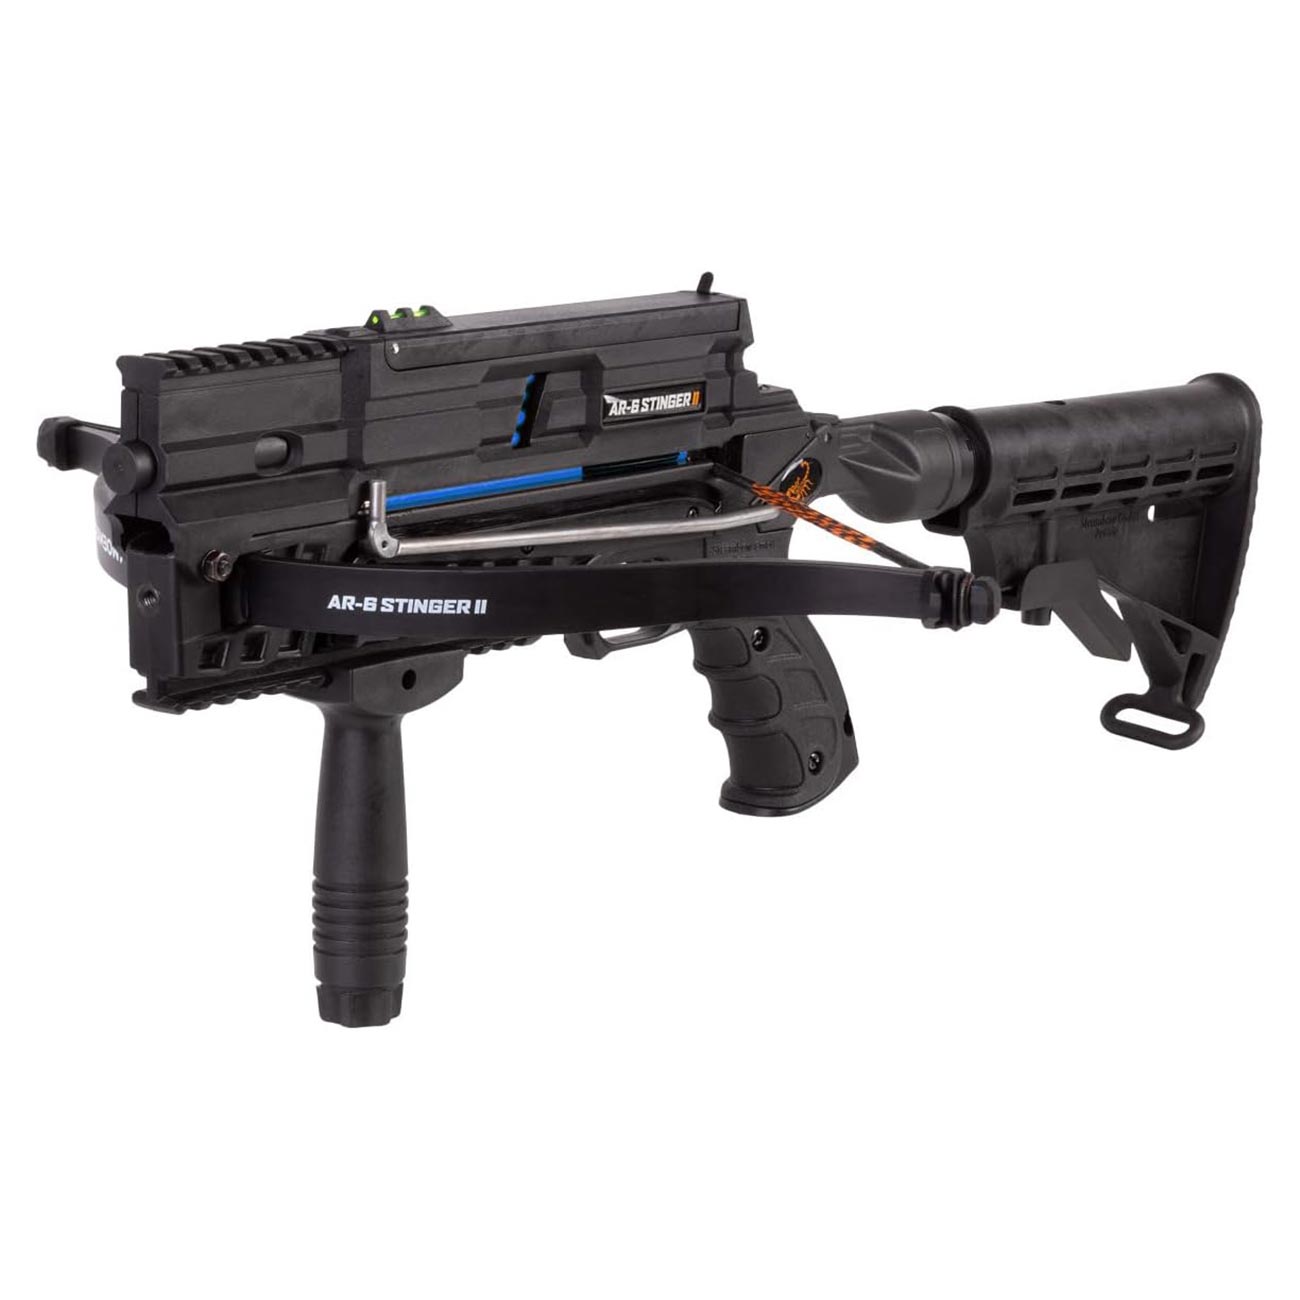 Steambow Stinger II AR 6 Tactical